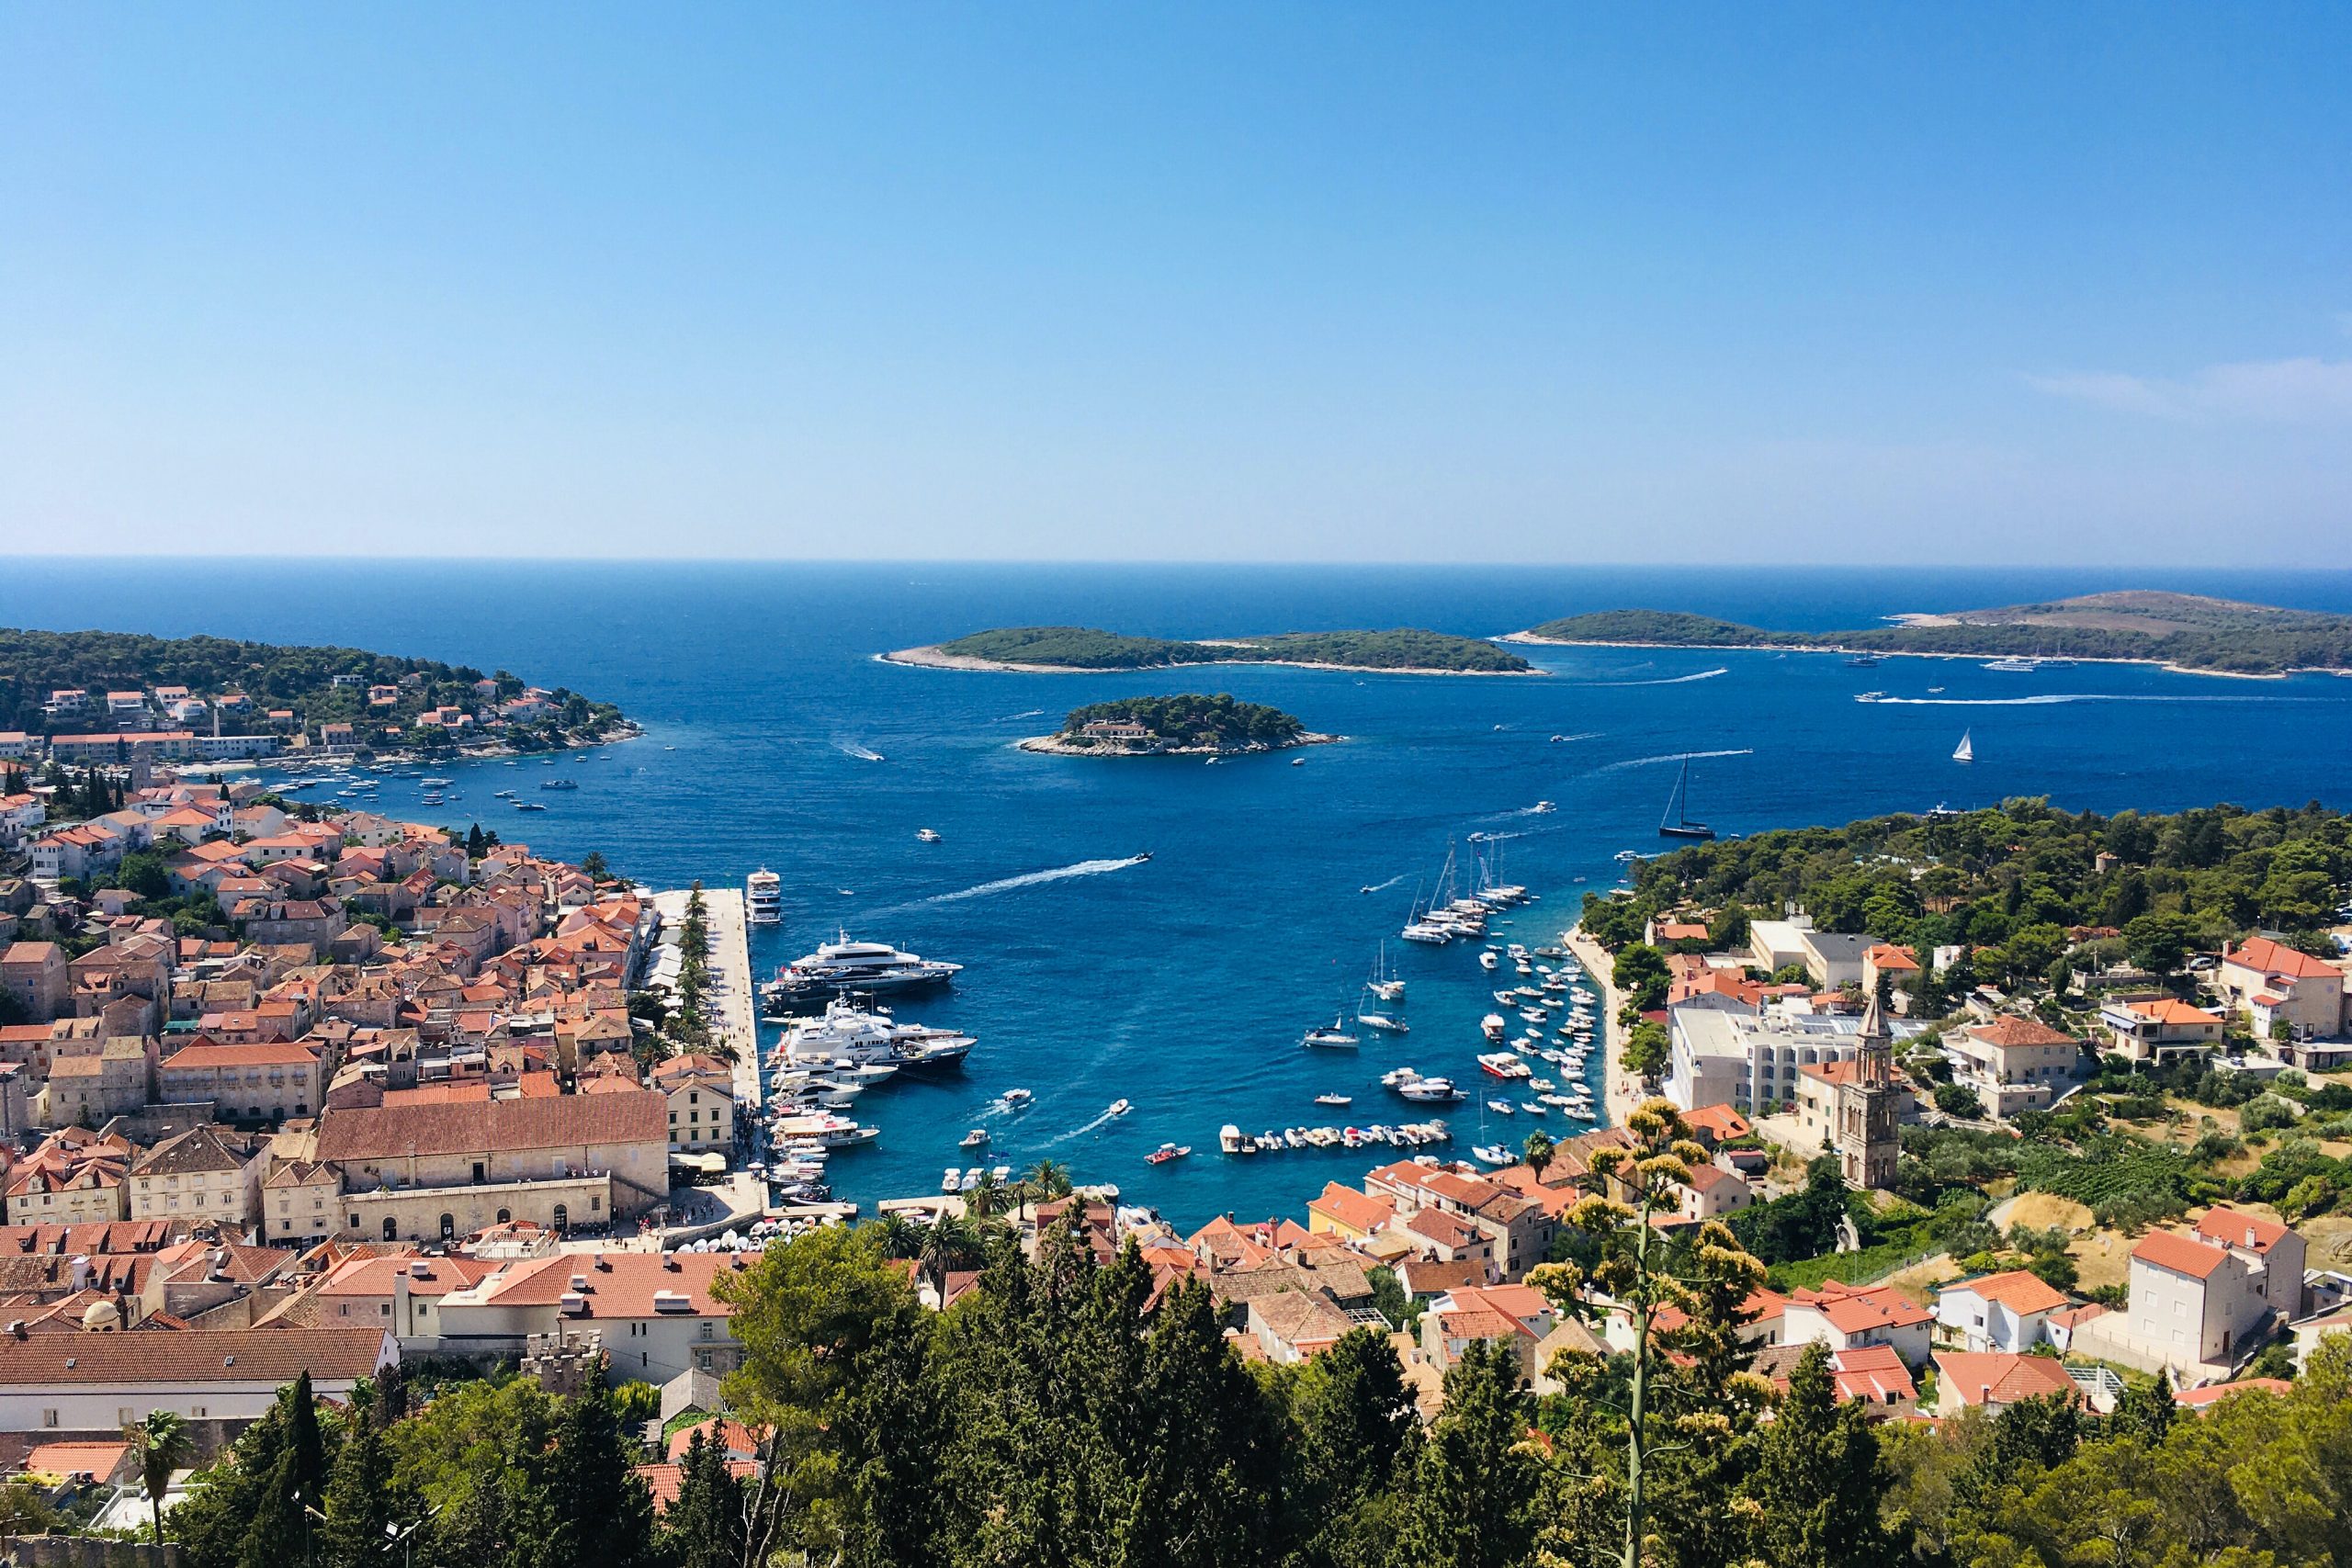 Perfecta Travel Island tour of Hvar with cabrio old-timer Beetle cars, self-drive image